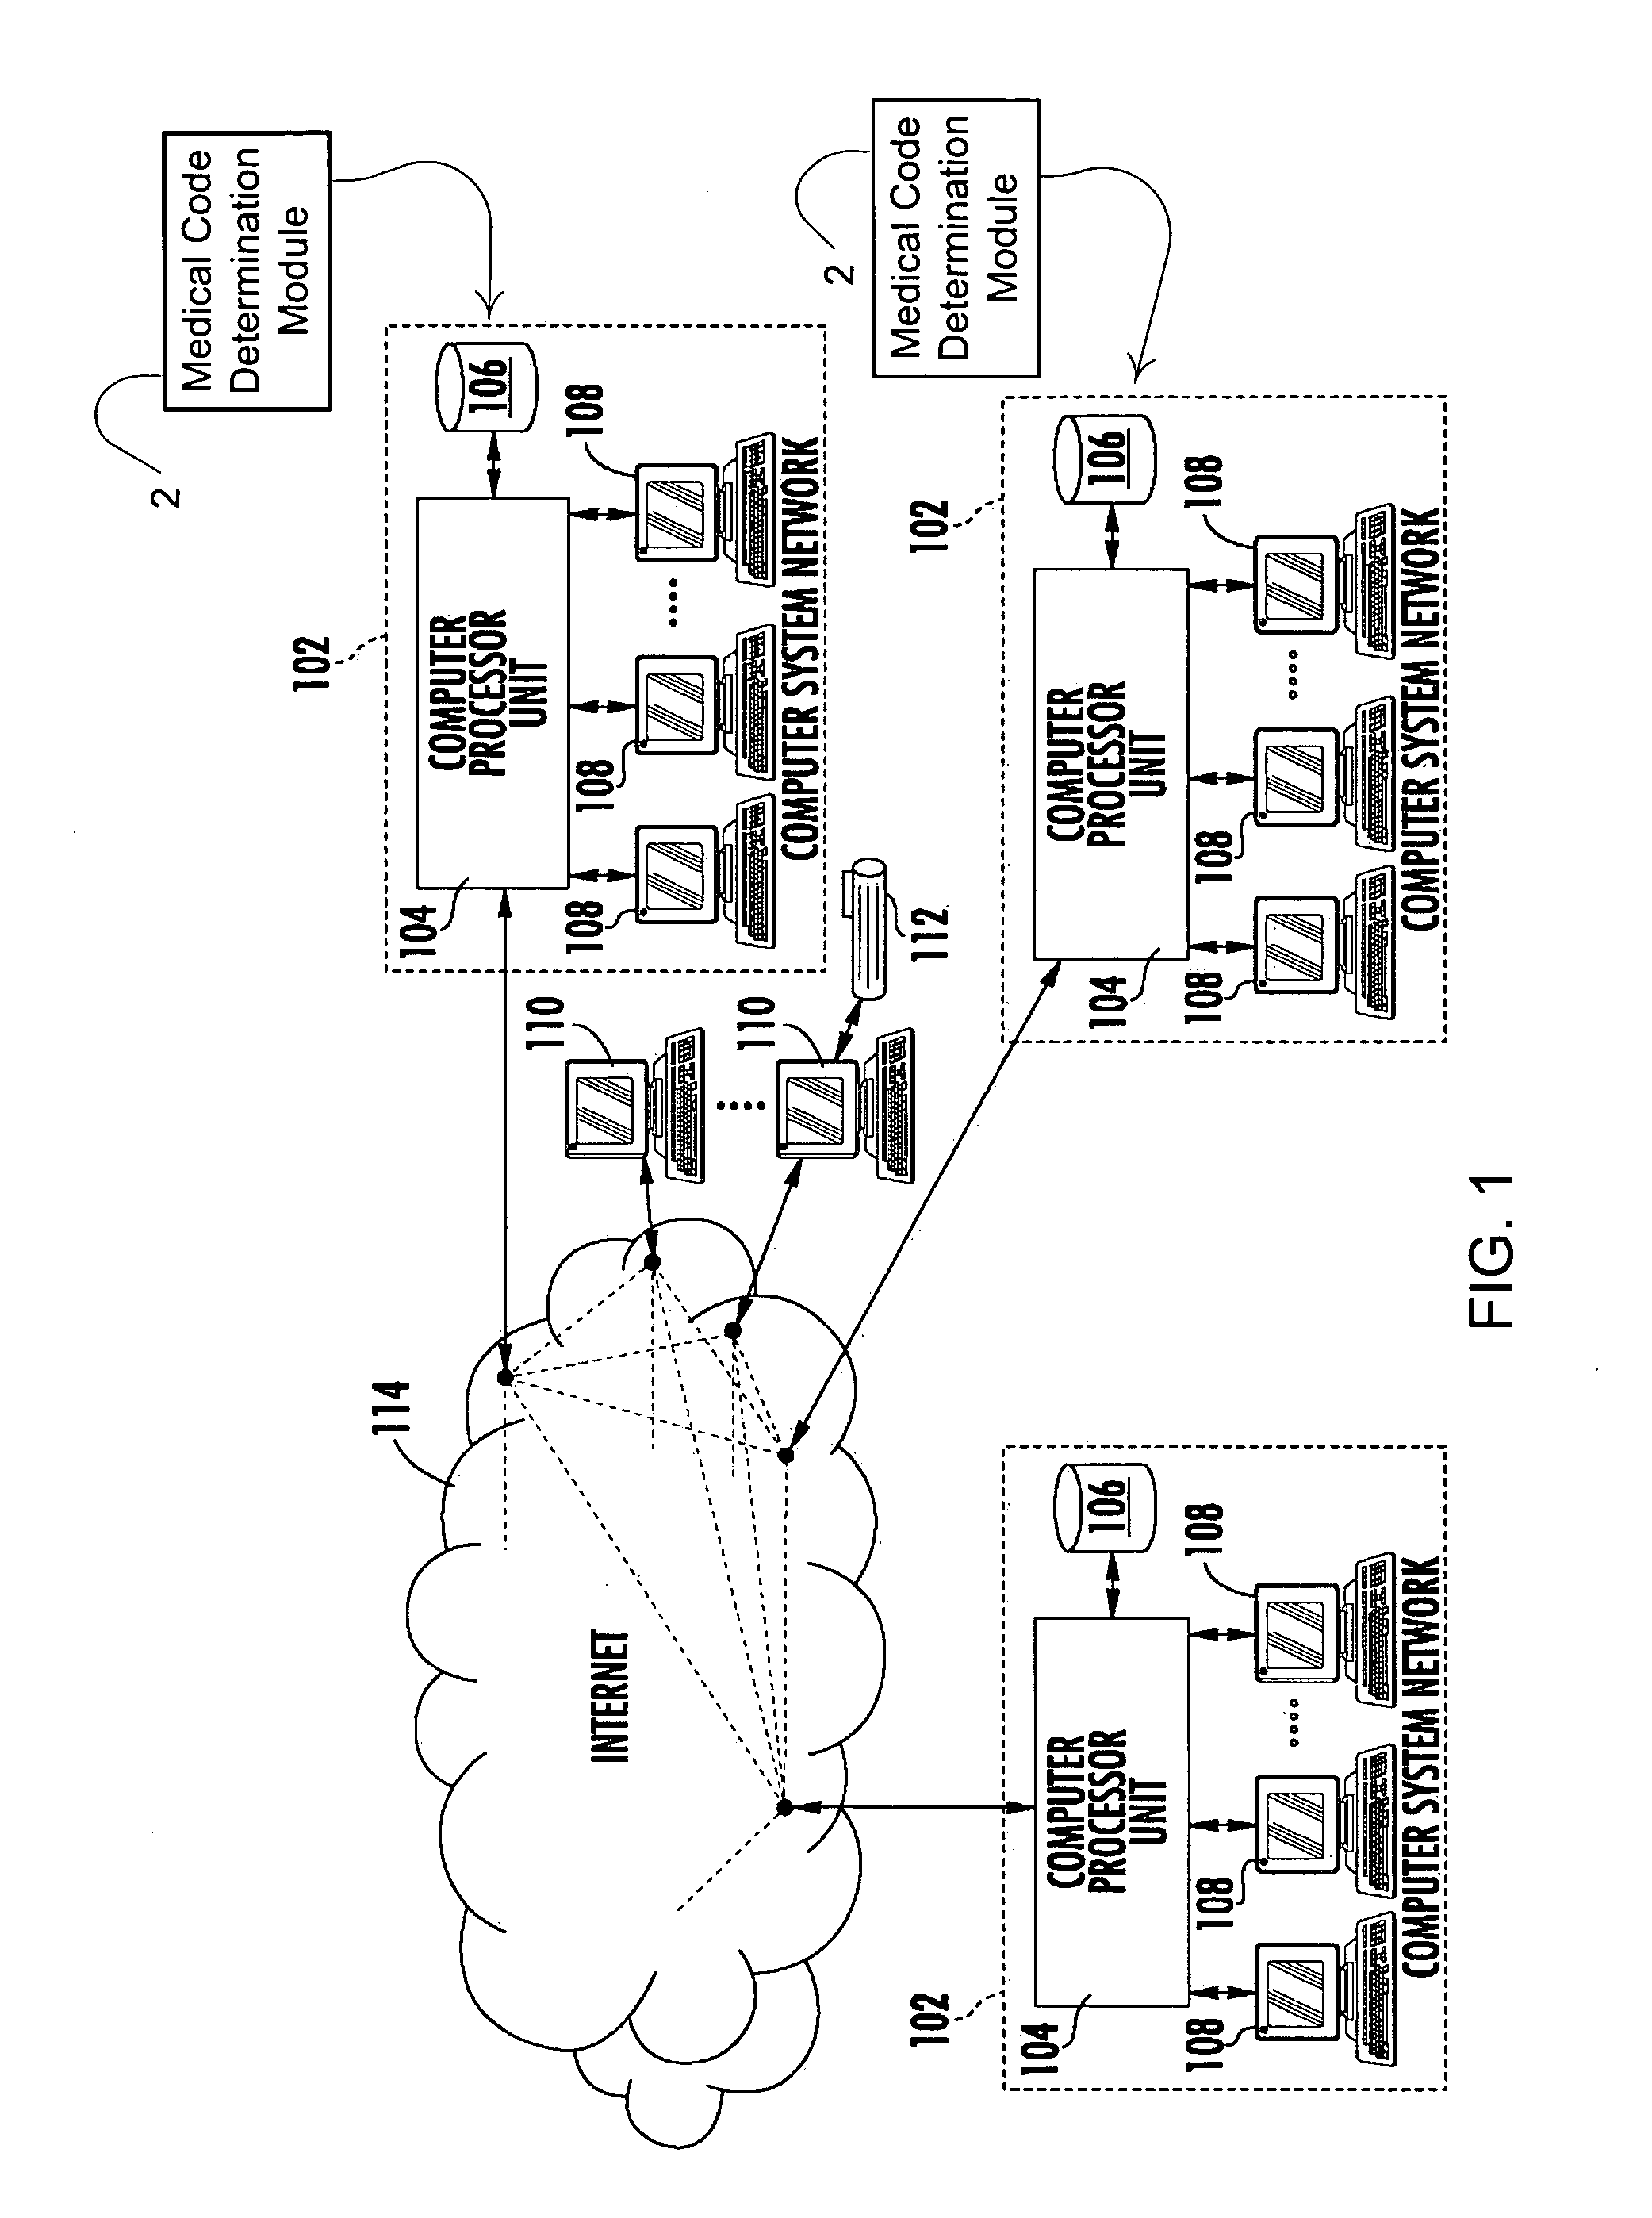 System and method for automatic assignment of medical codes to unformatted data